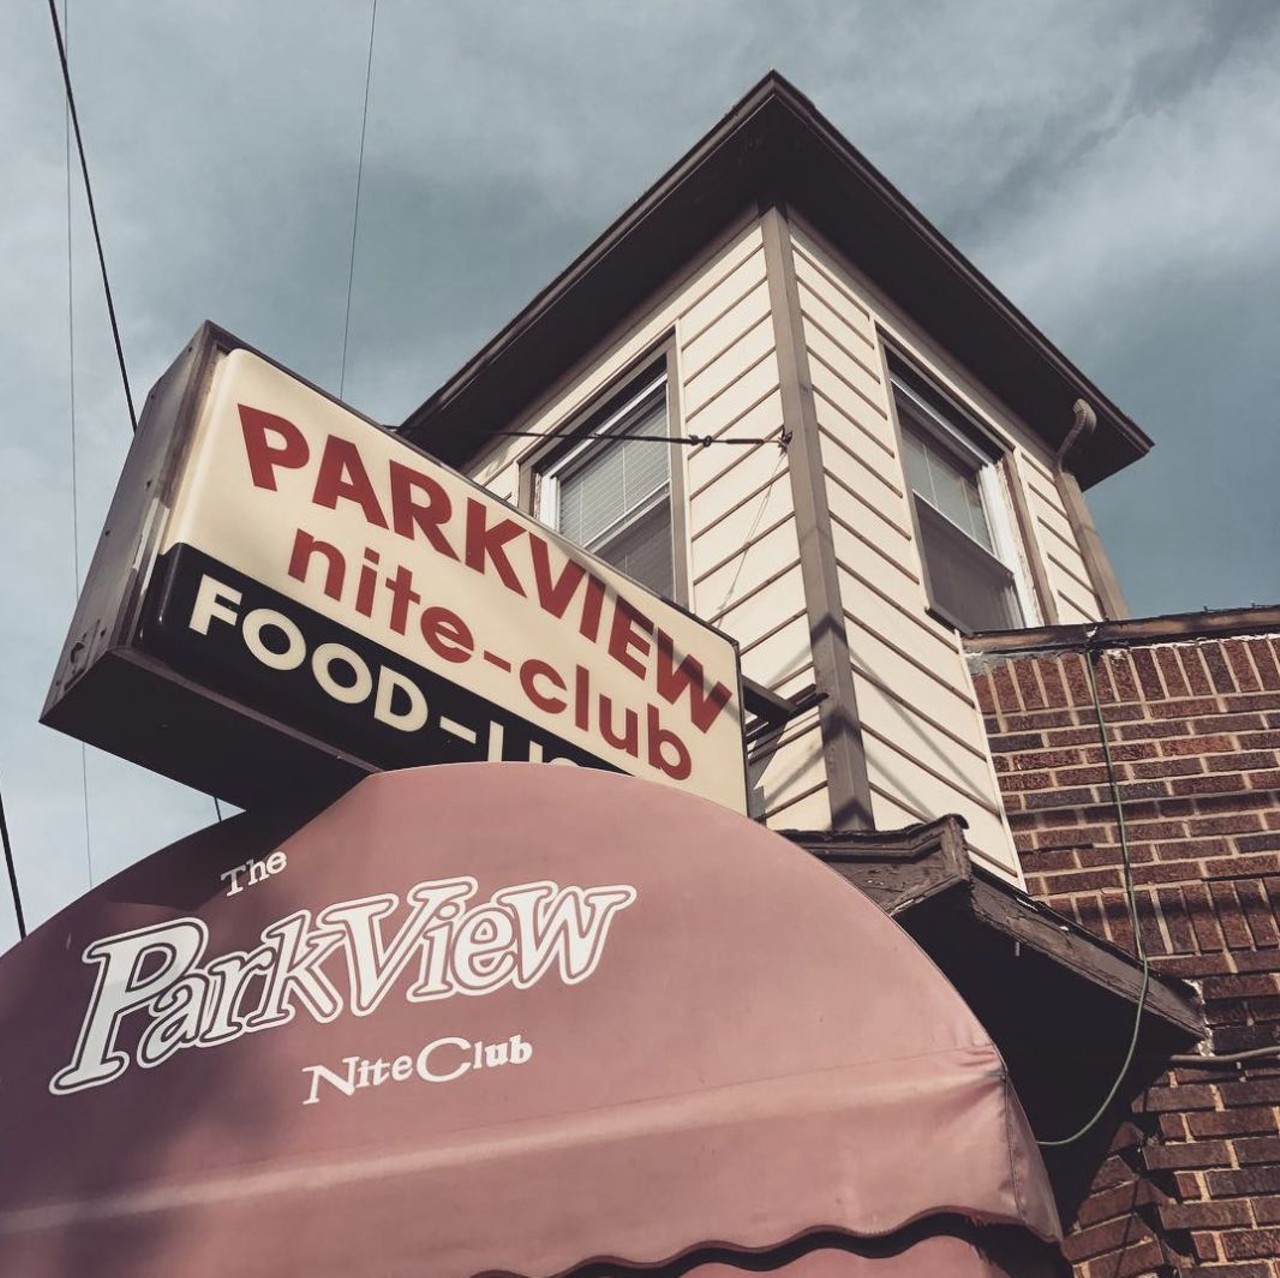  Parkview Nite Club
1261 West 58th St., Cleveland
Recent changes in the kitchen at Parkview Nite Club are just the latest chapter in the quest to offer guests quality fare at neighborly prices. Their smoked salmon BLT was featured on Diners, Drive-Ins and Dives.
Photo via @JMPIsAwesome/Instagram